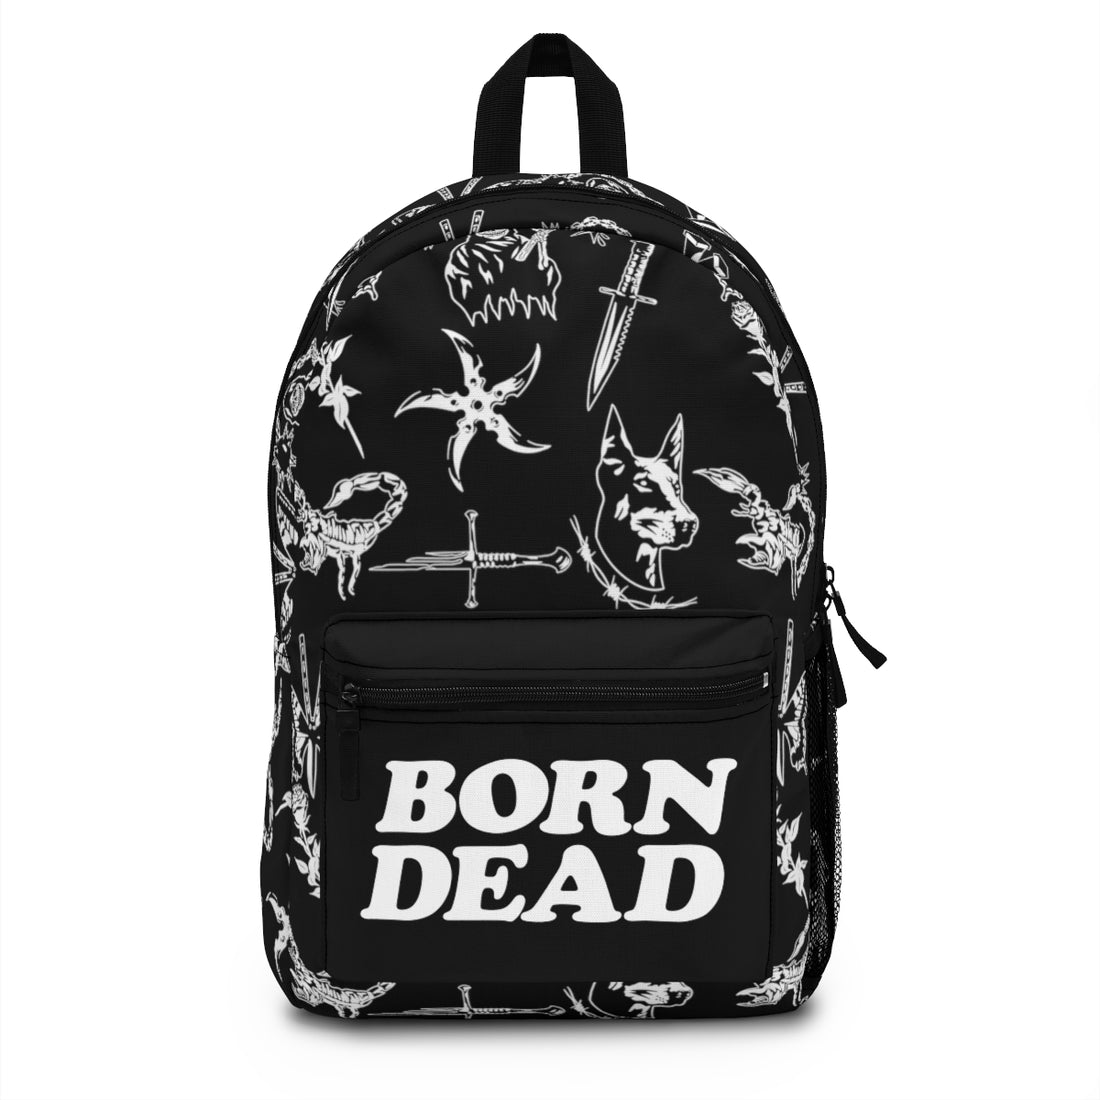 Born Dead Backpack Tattoo Inspired